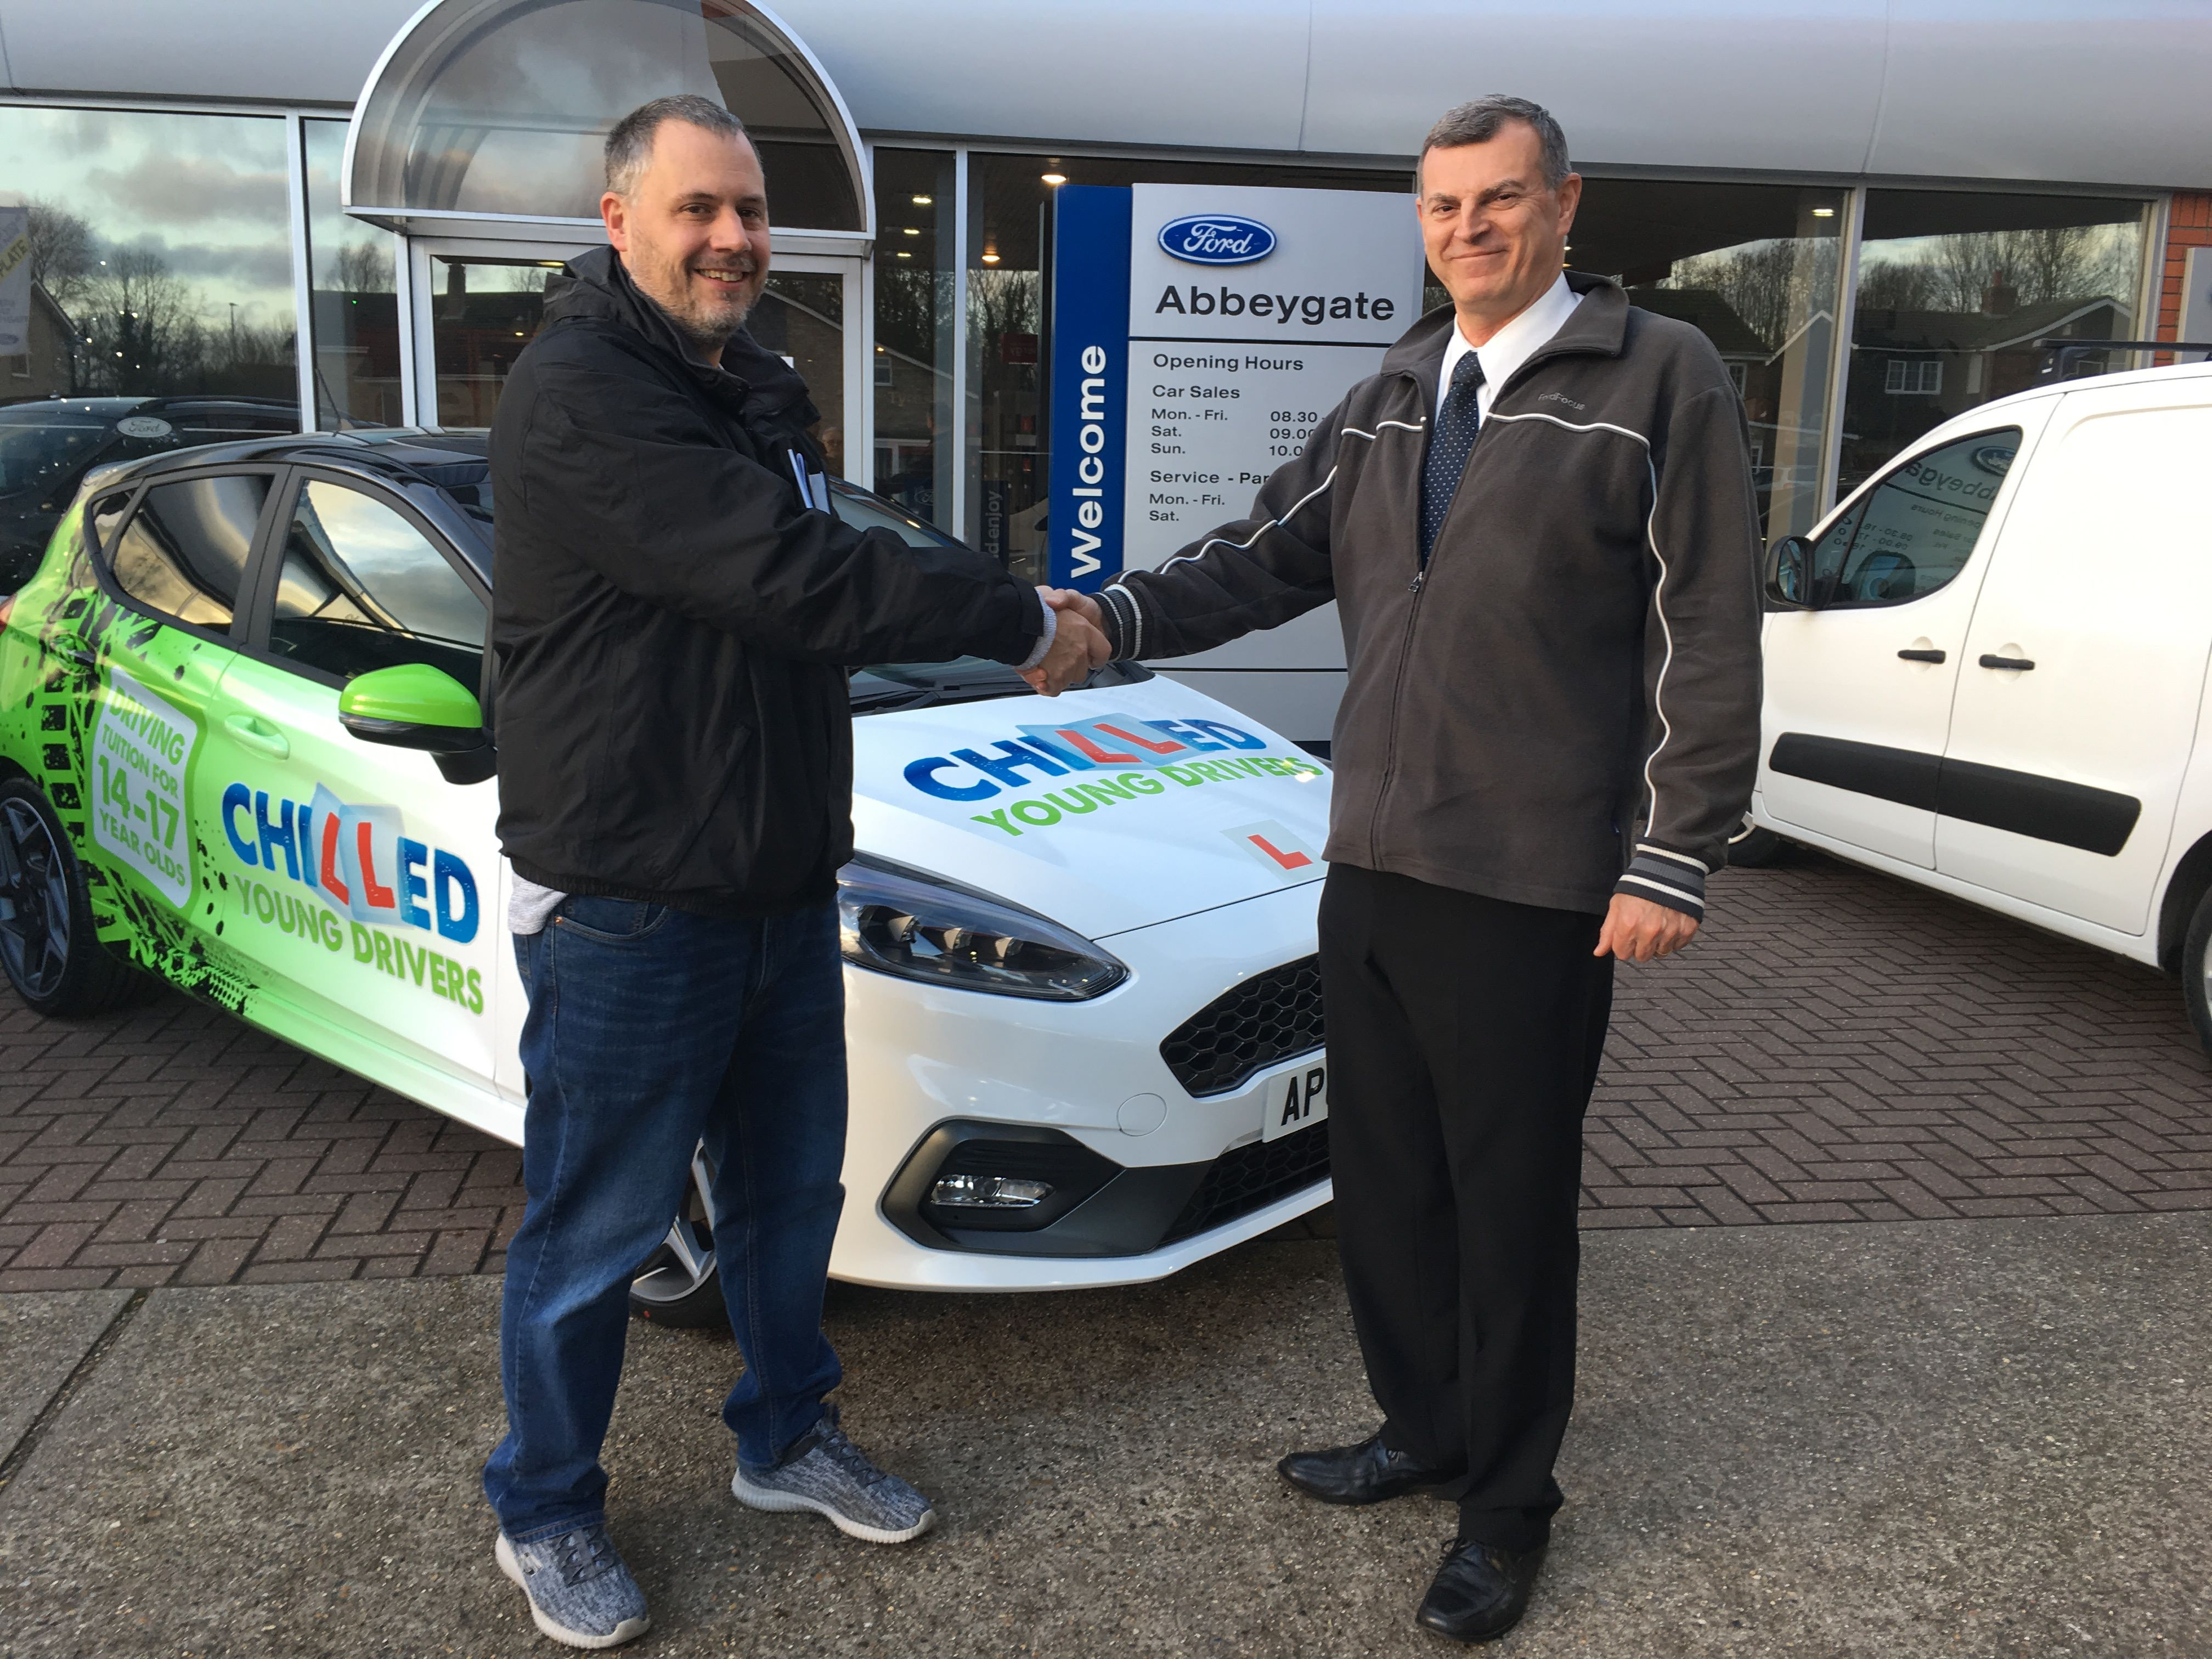 Chilled Driving Tuition Ltd take delivery of a New Ford Fiesta ST-3 for their fleet